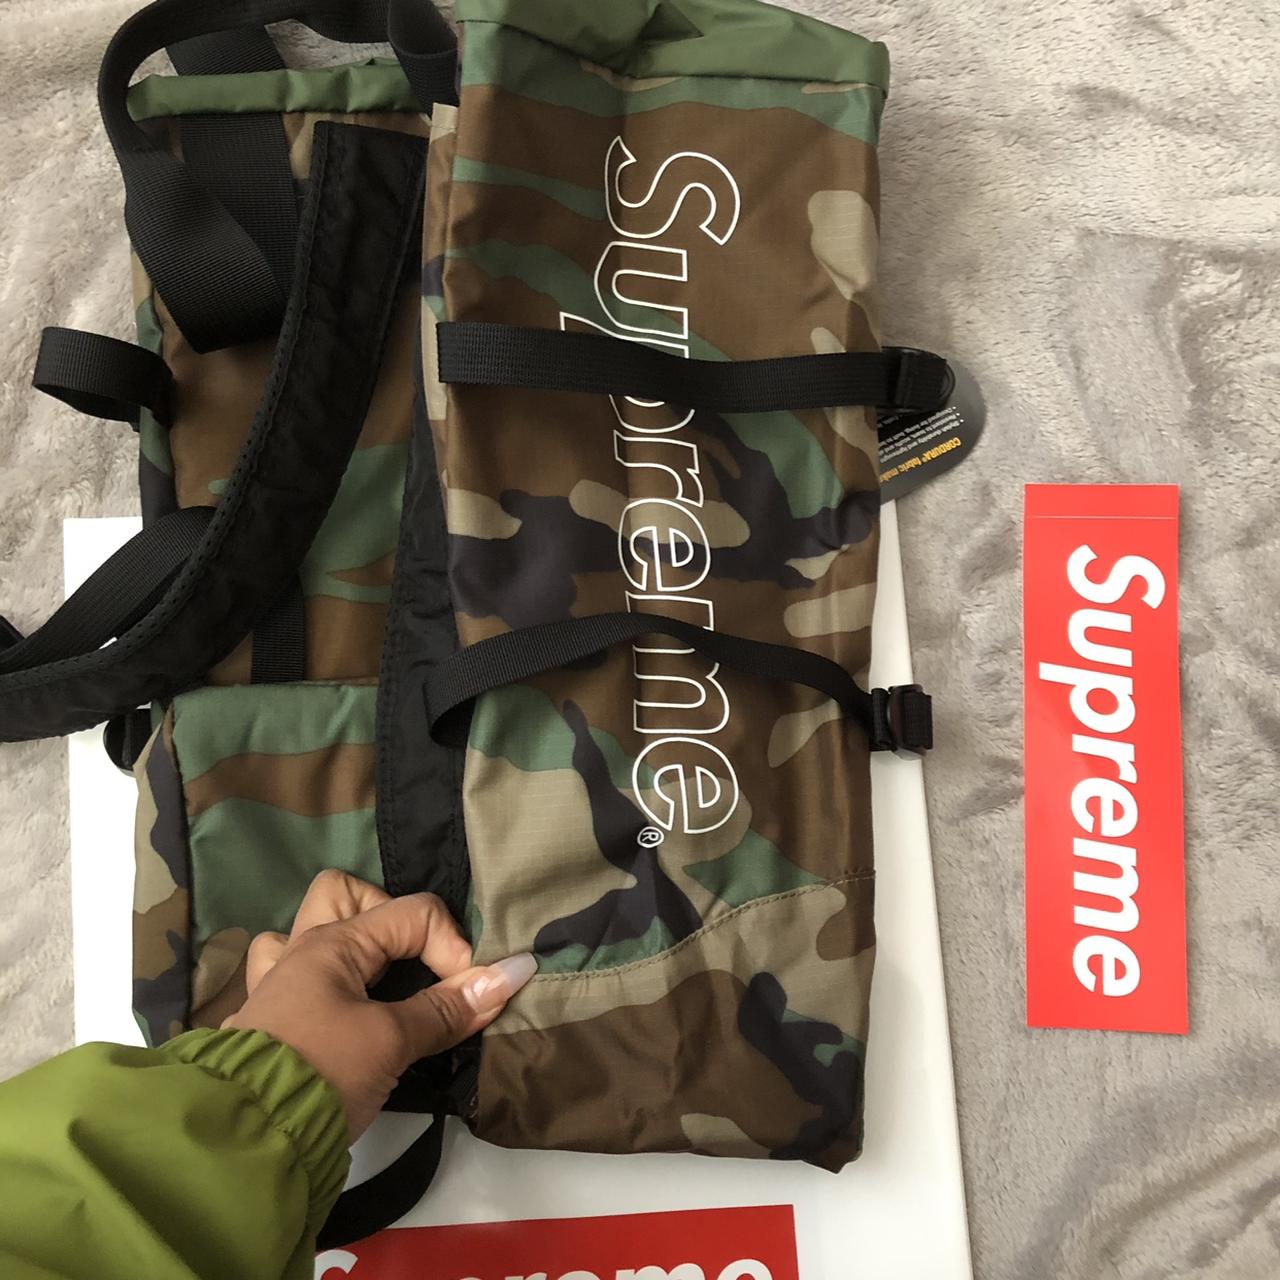 Supreme FW15 Backpack Good condition Located in - Depop